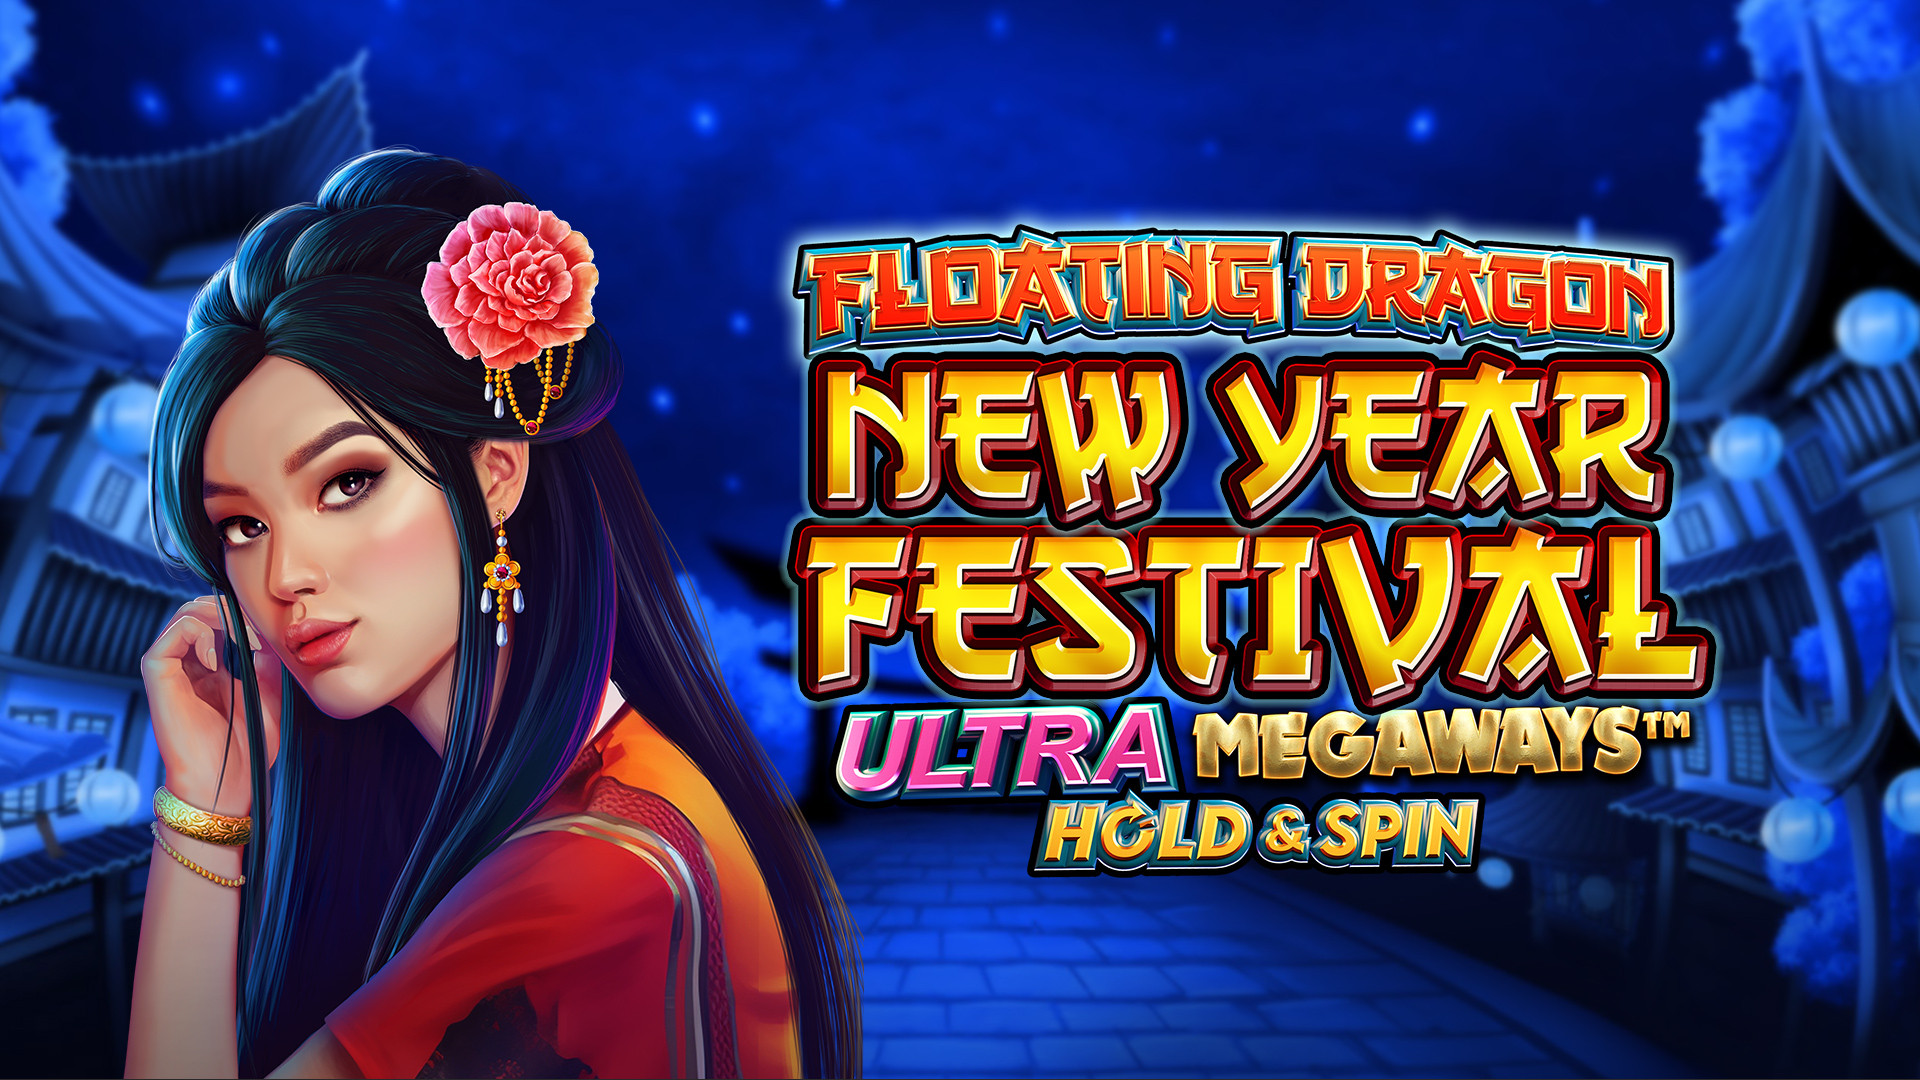 Floating Dragon New Year Festival Ultra MEGAWAYS Hold & Spin